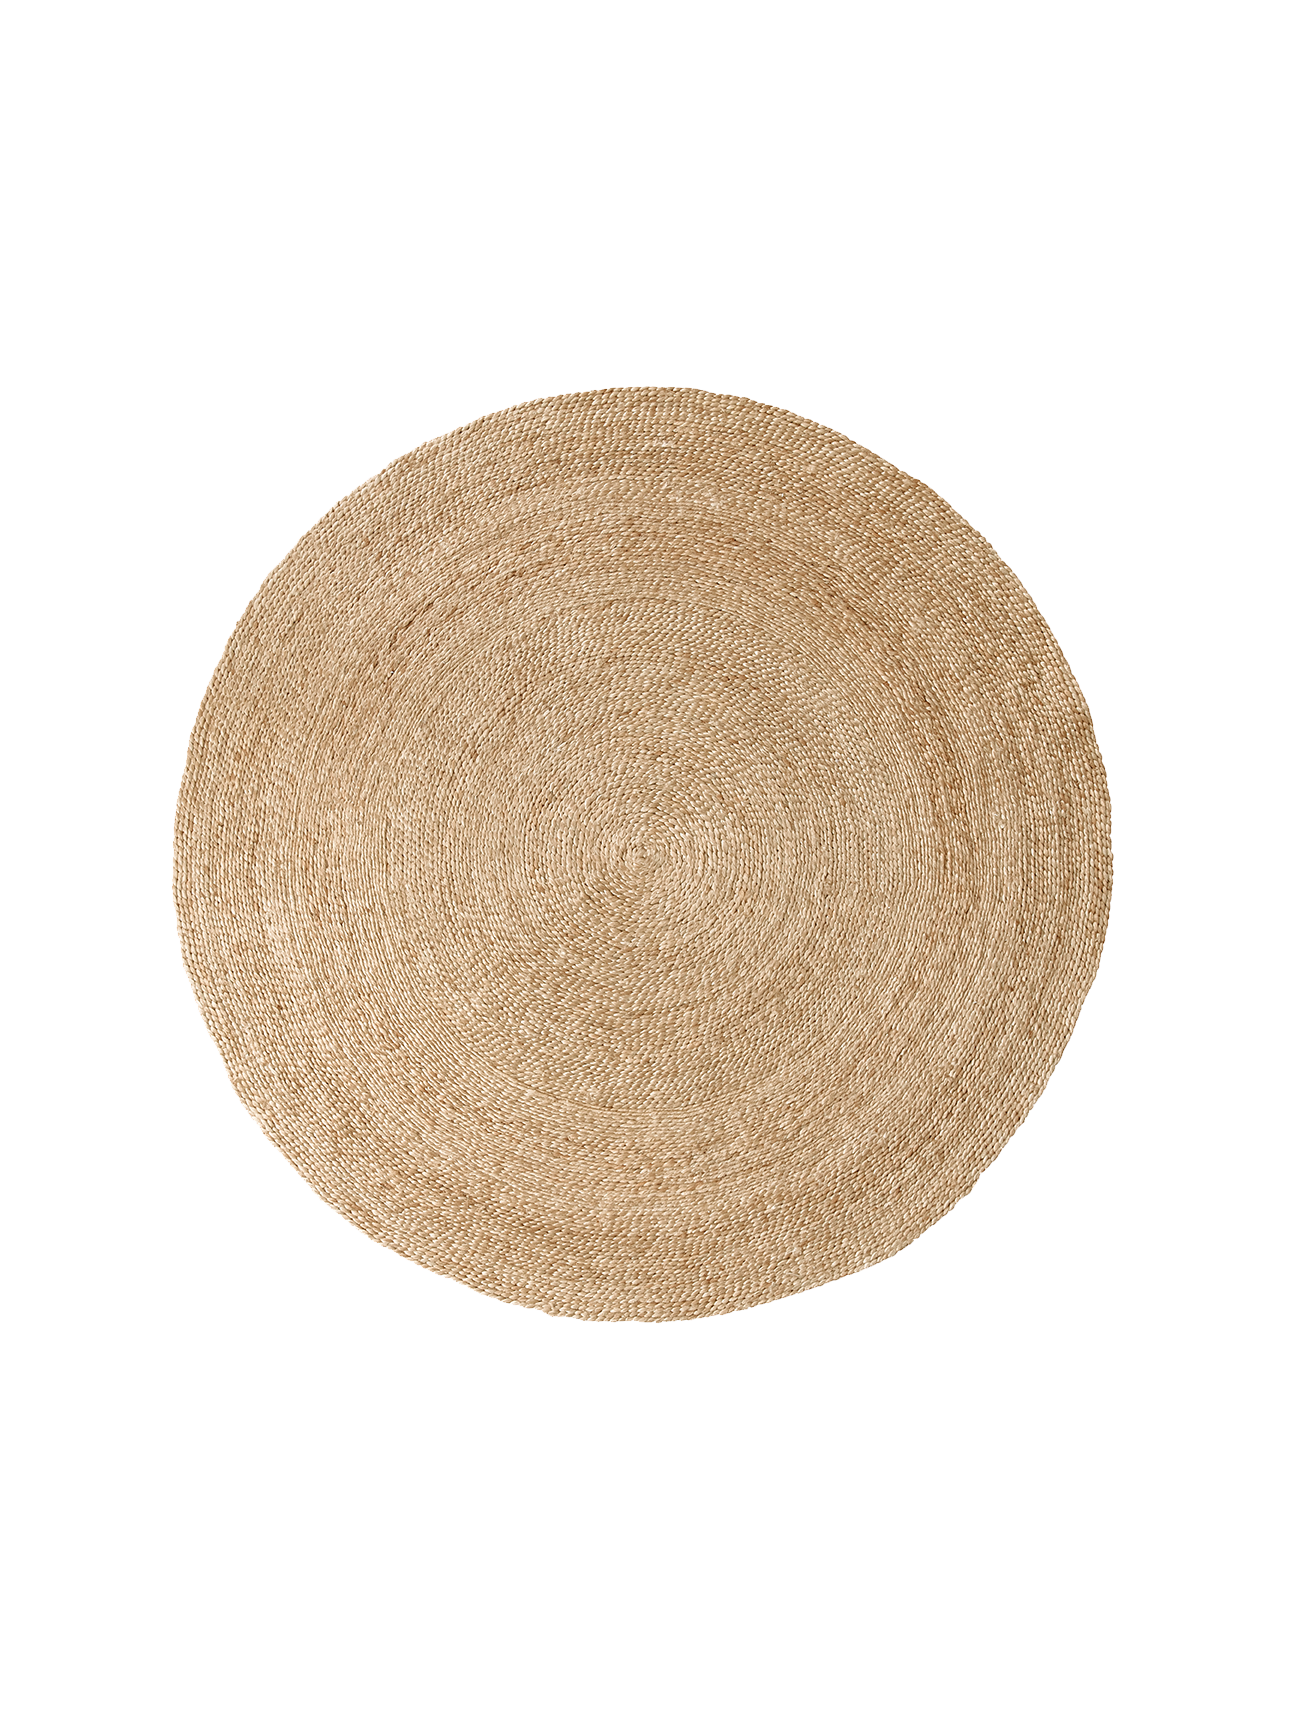 Armadillo Hand-Braided Round Jute Rug, 6-Foot, Made in India on Food52